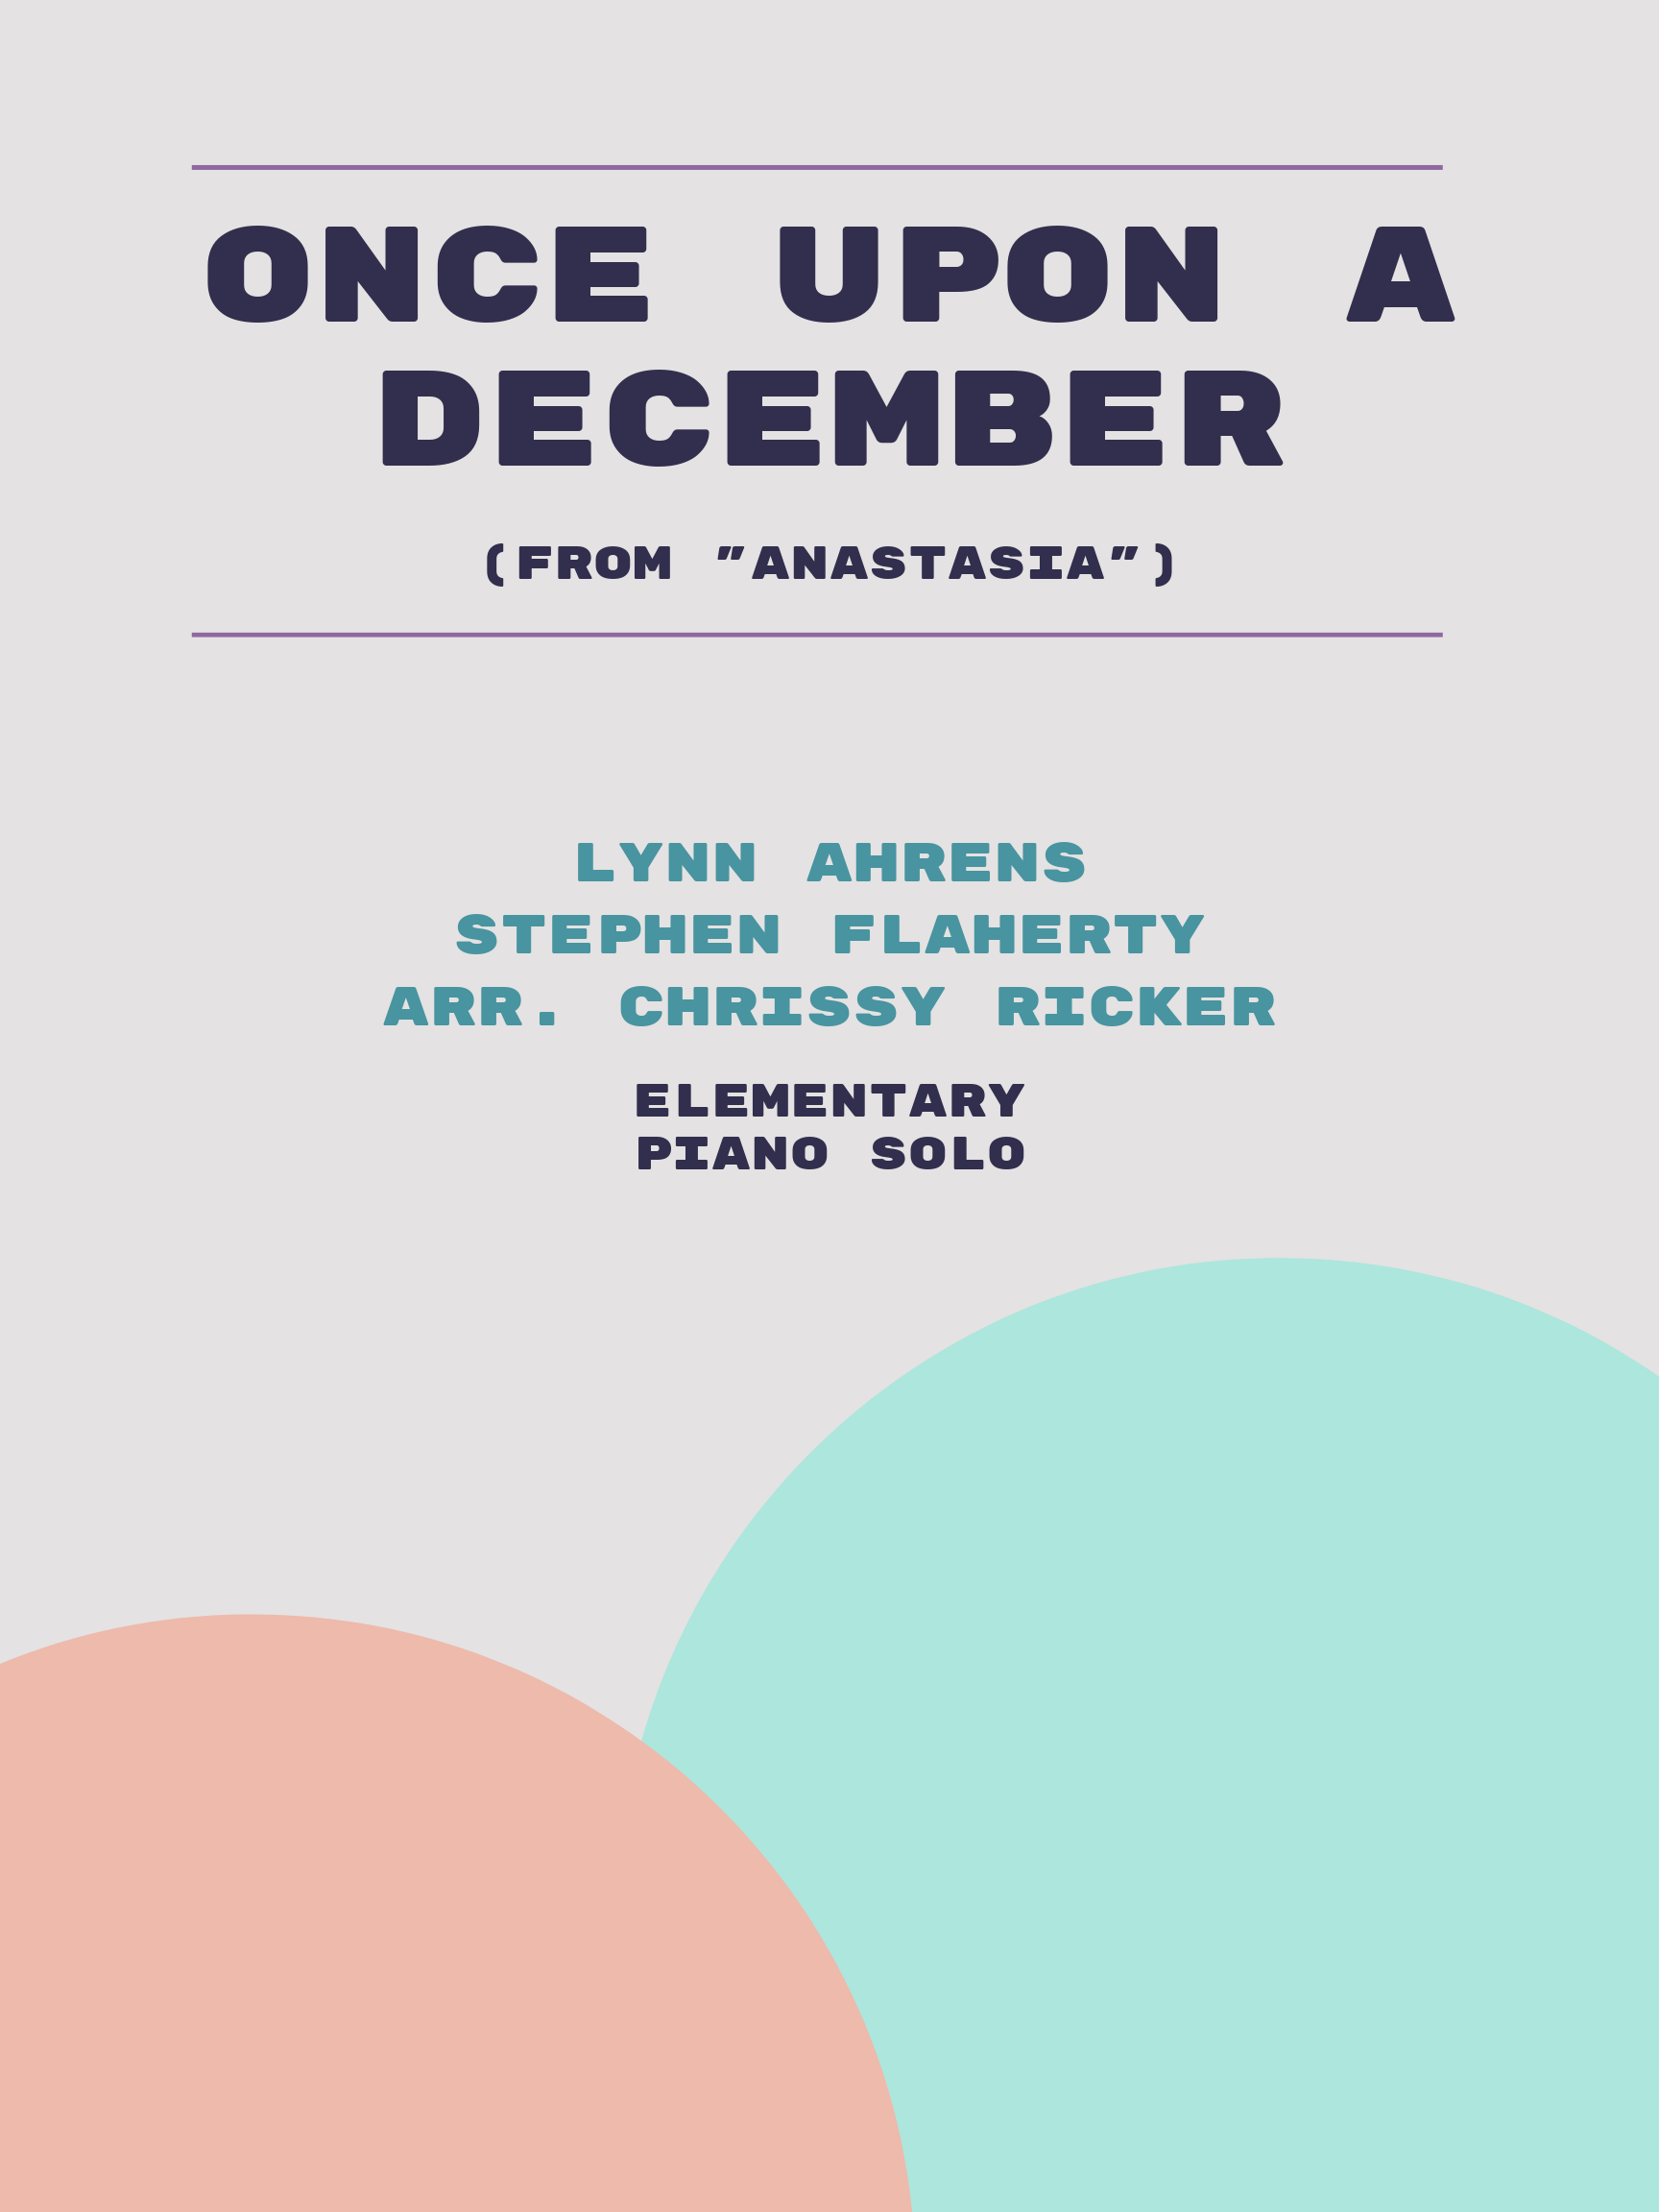 Once Upon a December by Lynn Ahrens, Stephen Flaherty